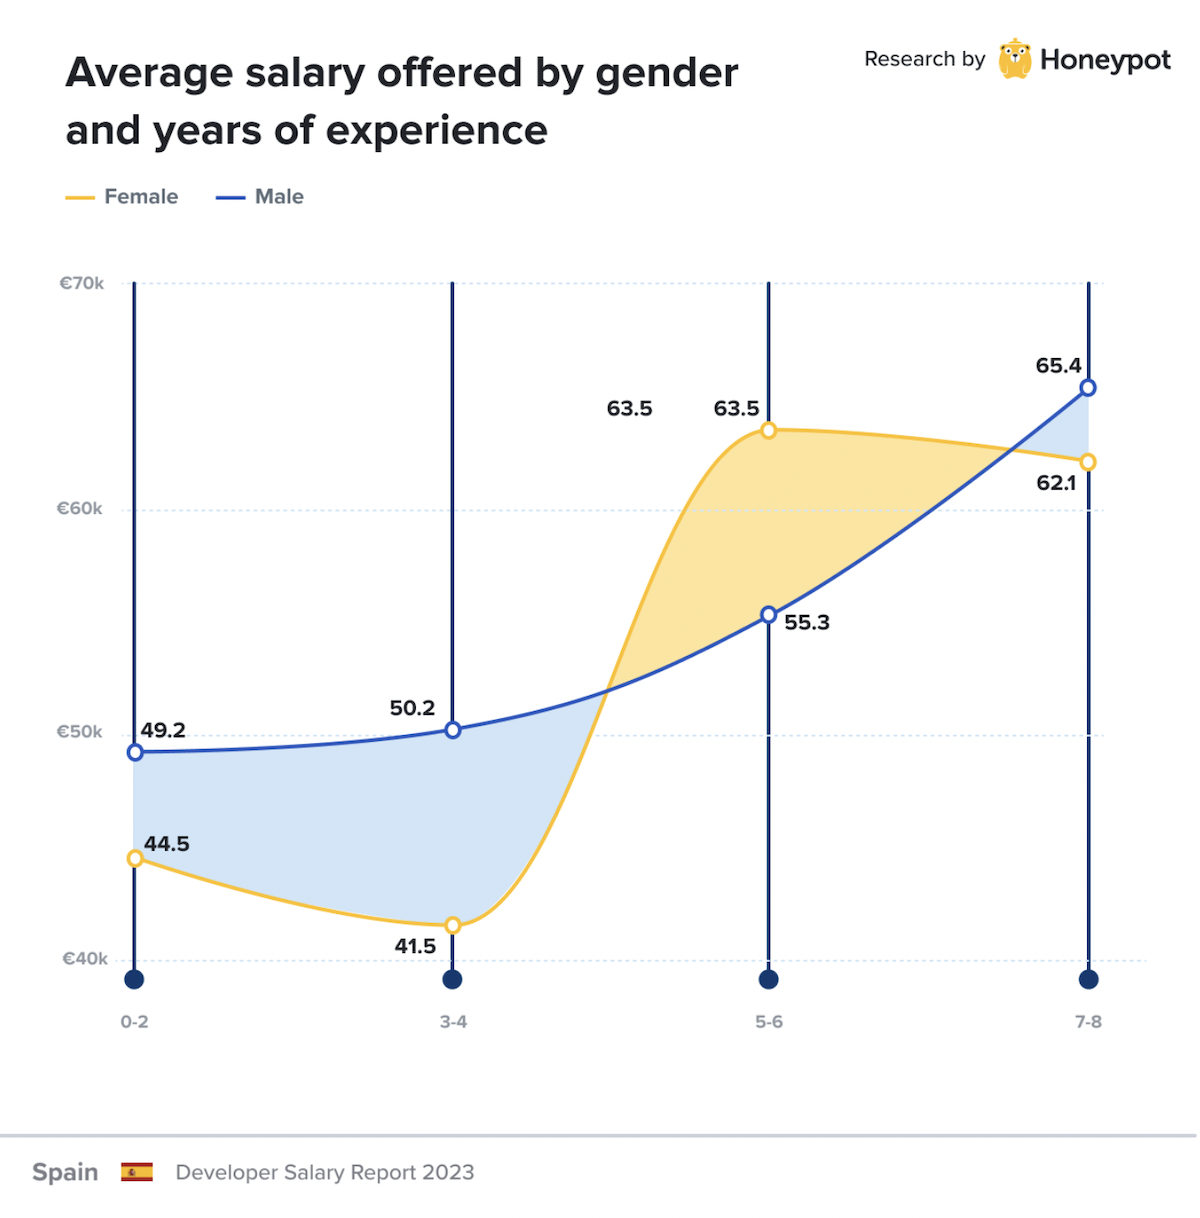 Spain – Average offered salary by gender and years of experience